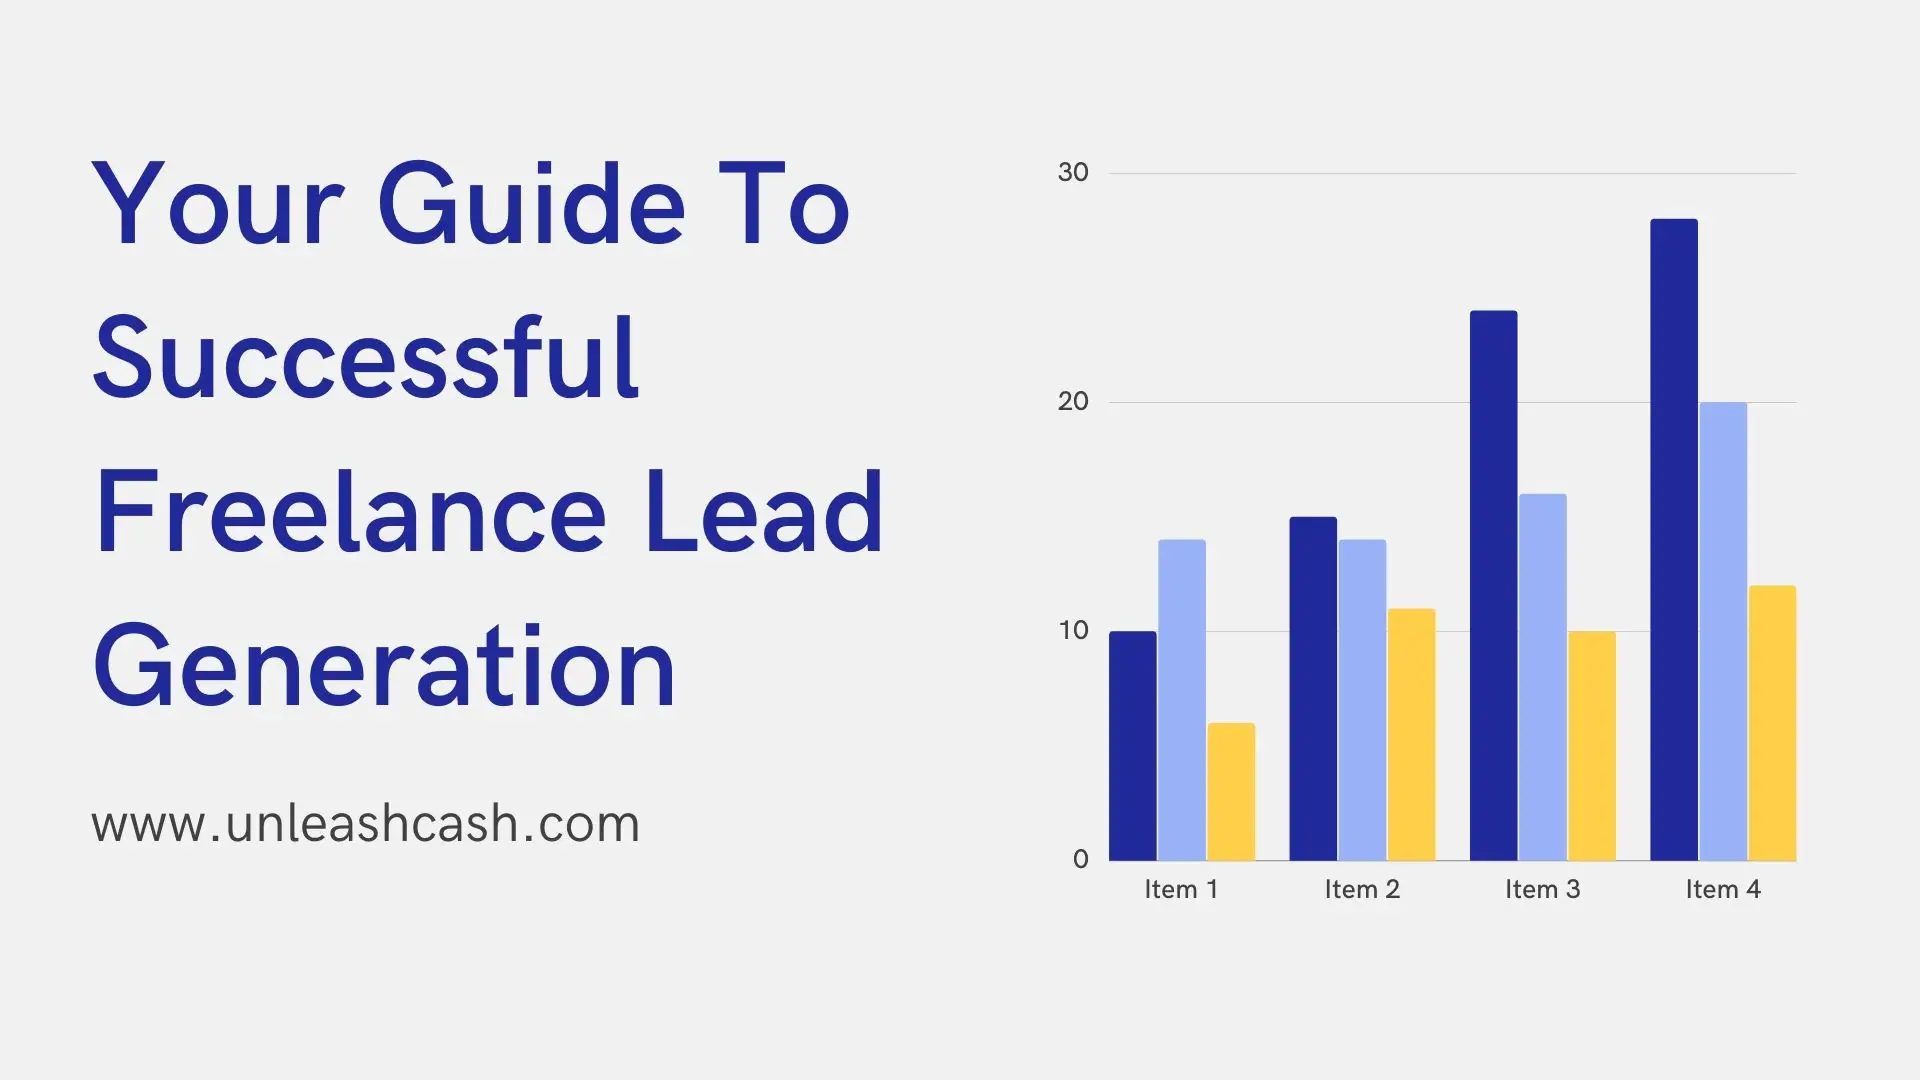 Your Guide To Successful Freelance Lead Generation